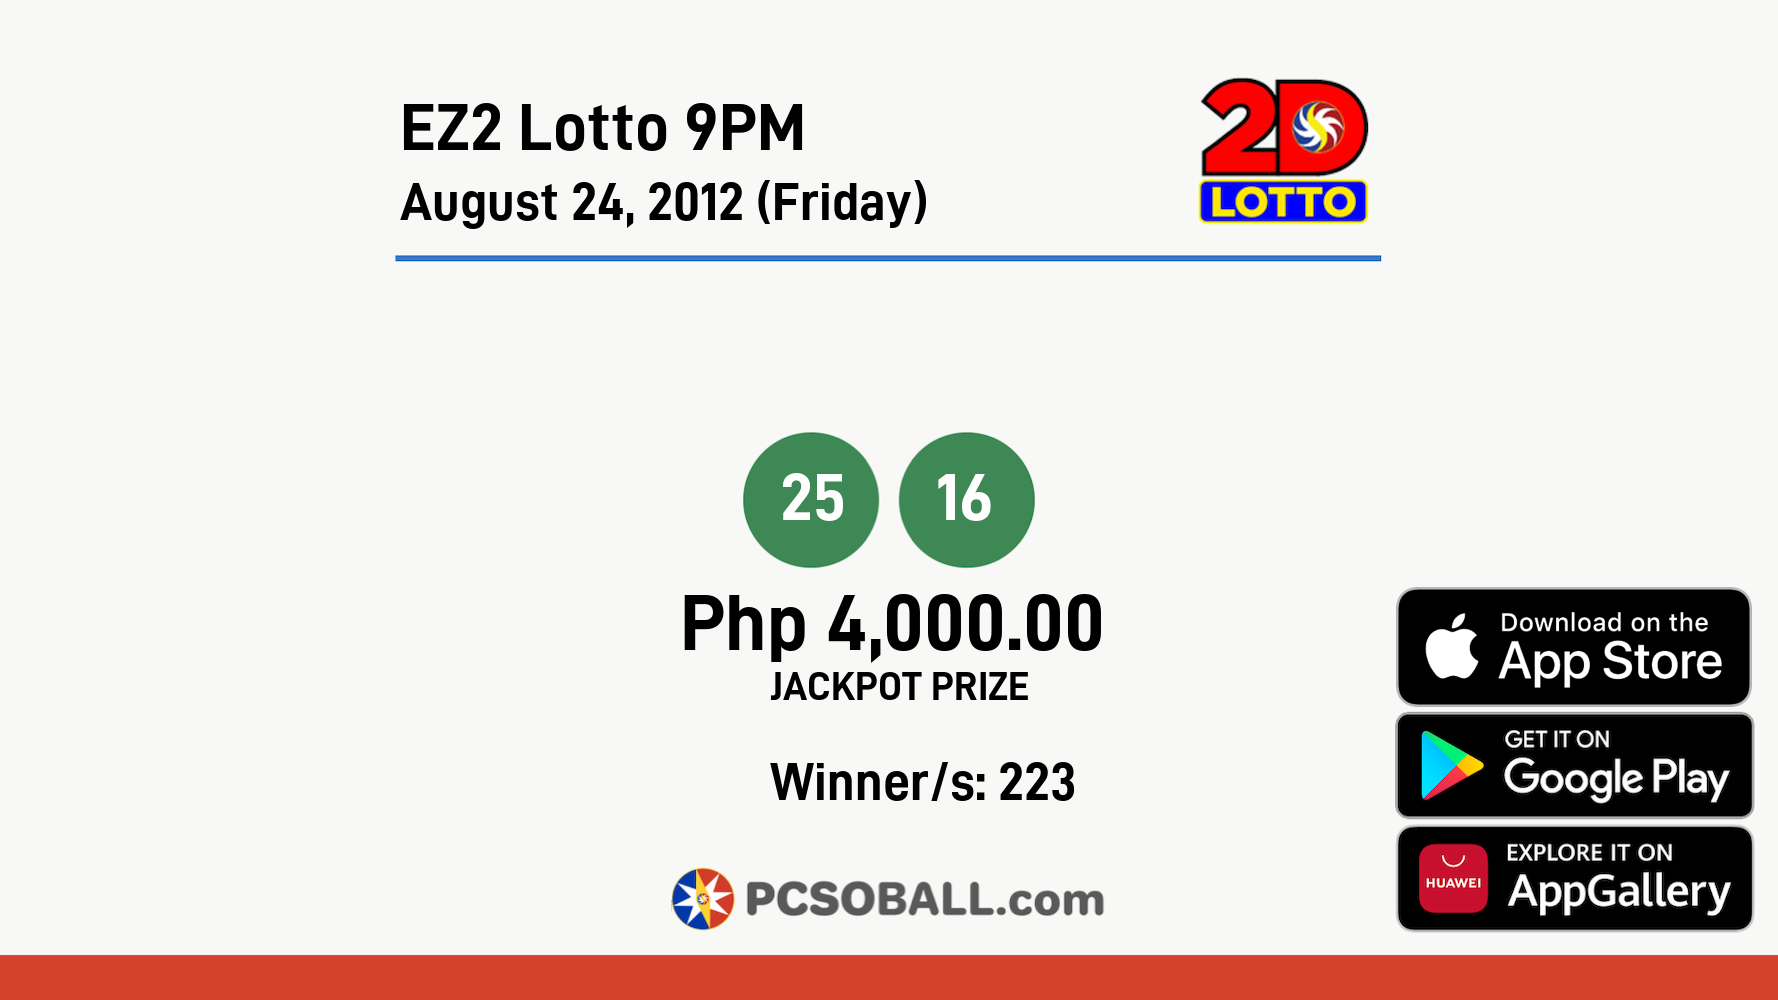 EZ2 Lotto 9PM August 24, 2012 (Friday) Result